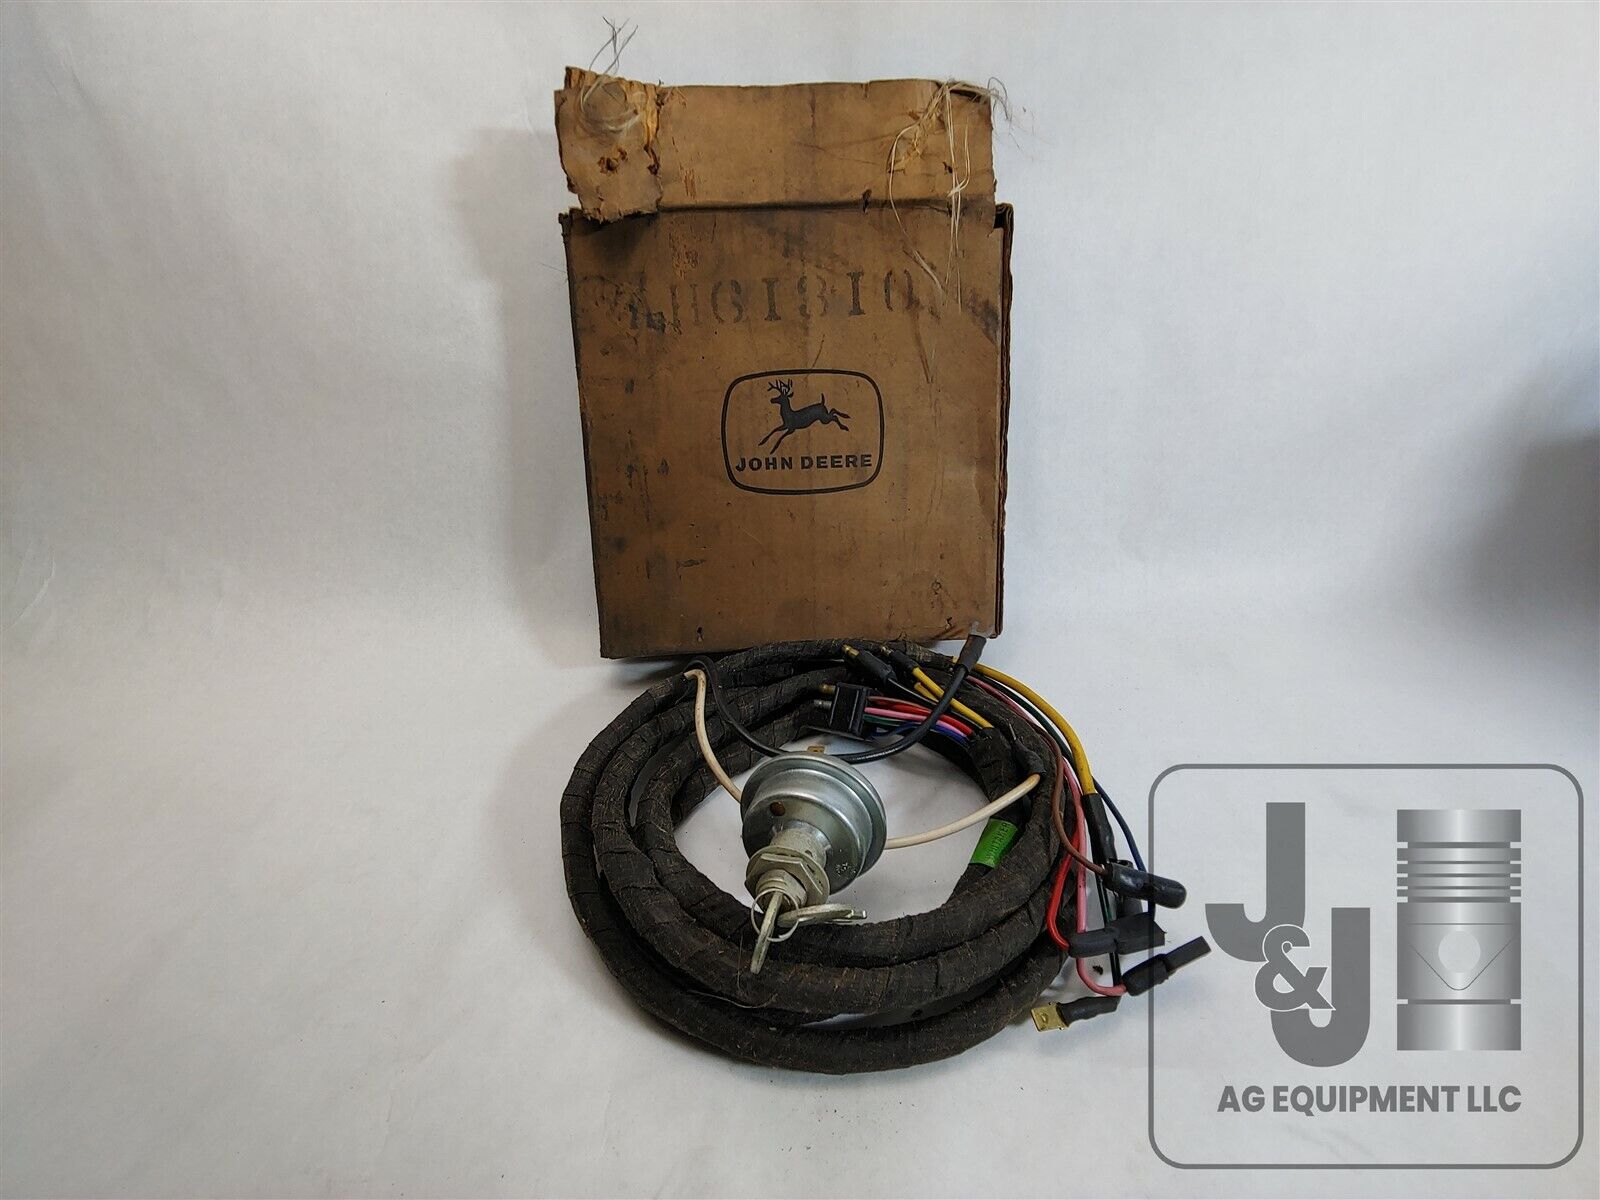 xx Genuine NOS John Deere Ignition Switch And Front Harness AH61310 55 105 Combine